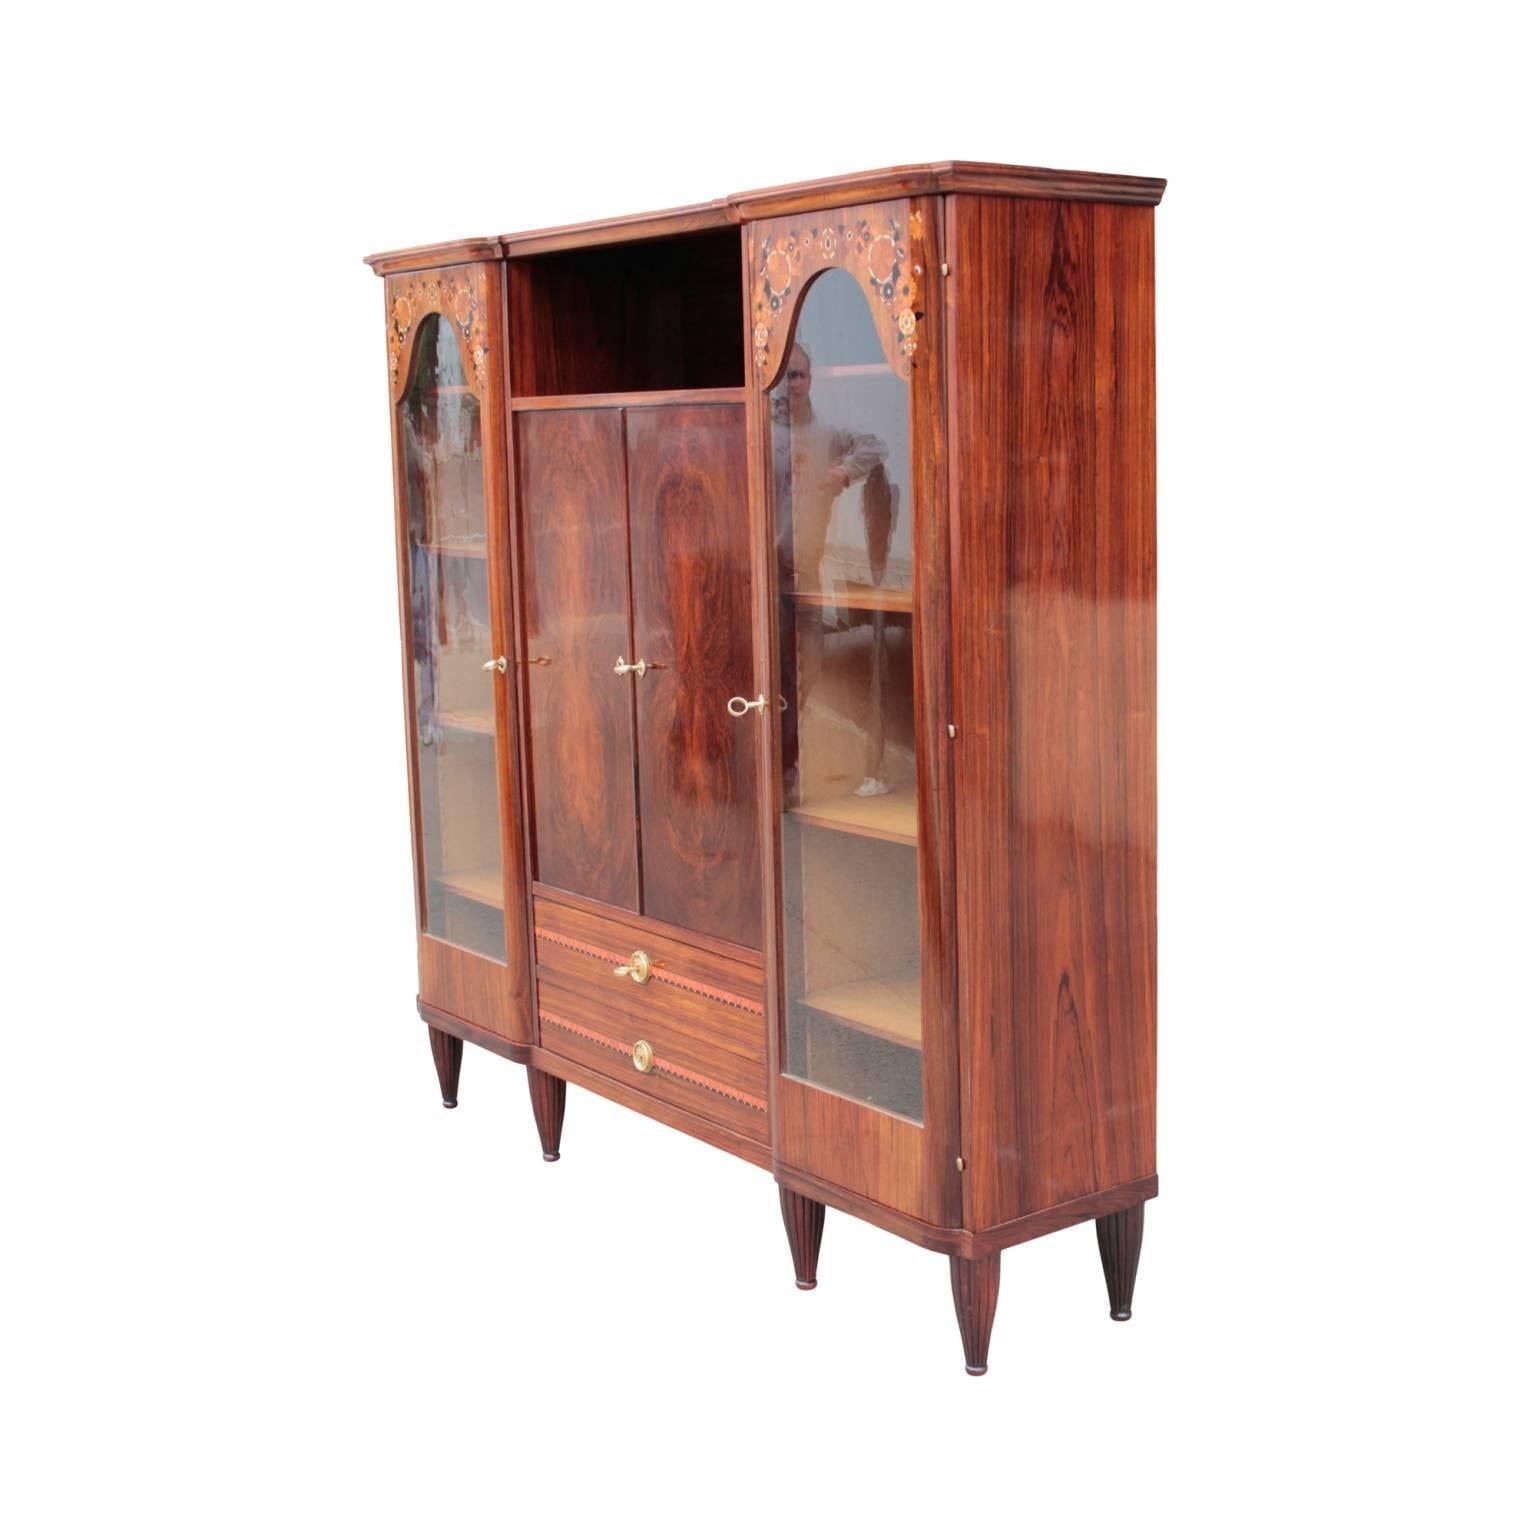 Superb French early Art Deco period vitrine/bookcase, most likely designed by Maurice Dufrene. Middle segment having an exposed display niche, pair of doors enclosing two shelves and a pair of drawers decorated with inlay in ebony, ivory and